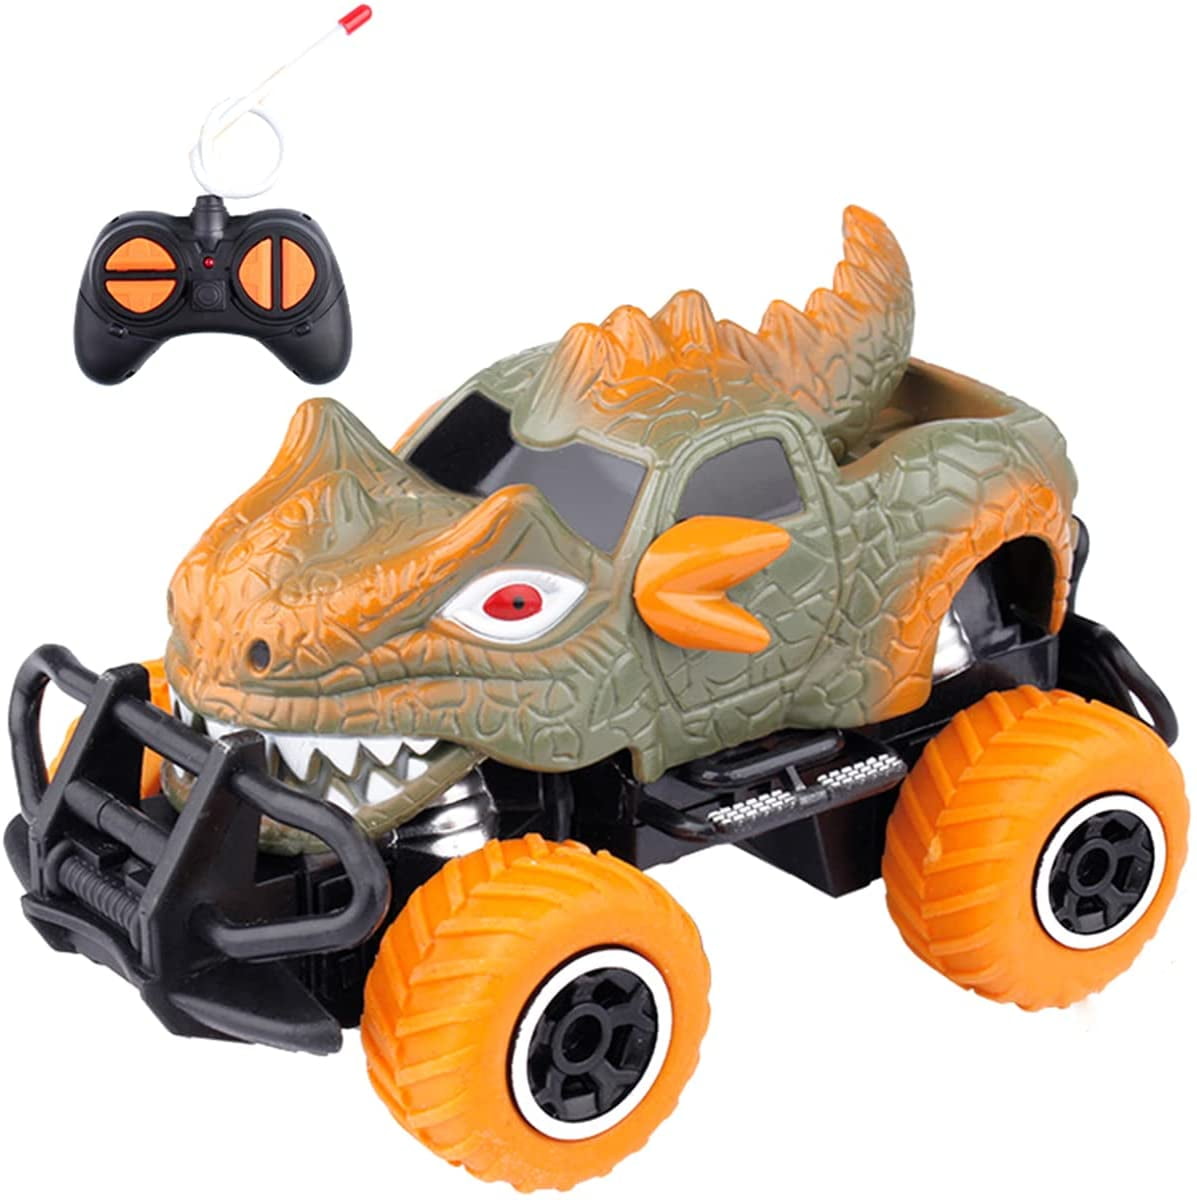 Dinosaur Toys for Kids 3-5,Monster Trucks for Boys,Toys for 3 4 5 6 Year  Old Boys,4-Channel Off-Road RC Car,1/43 Scale Remote Control Car for Girls  